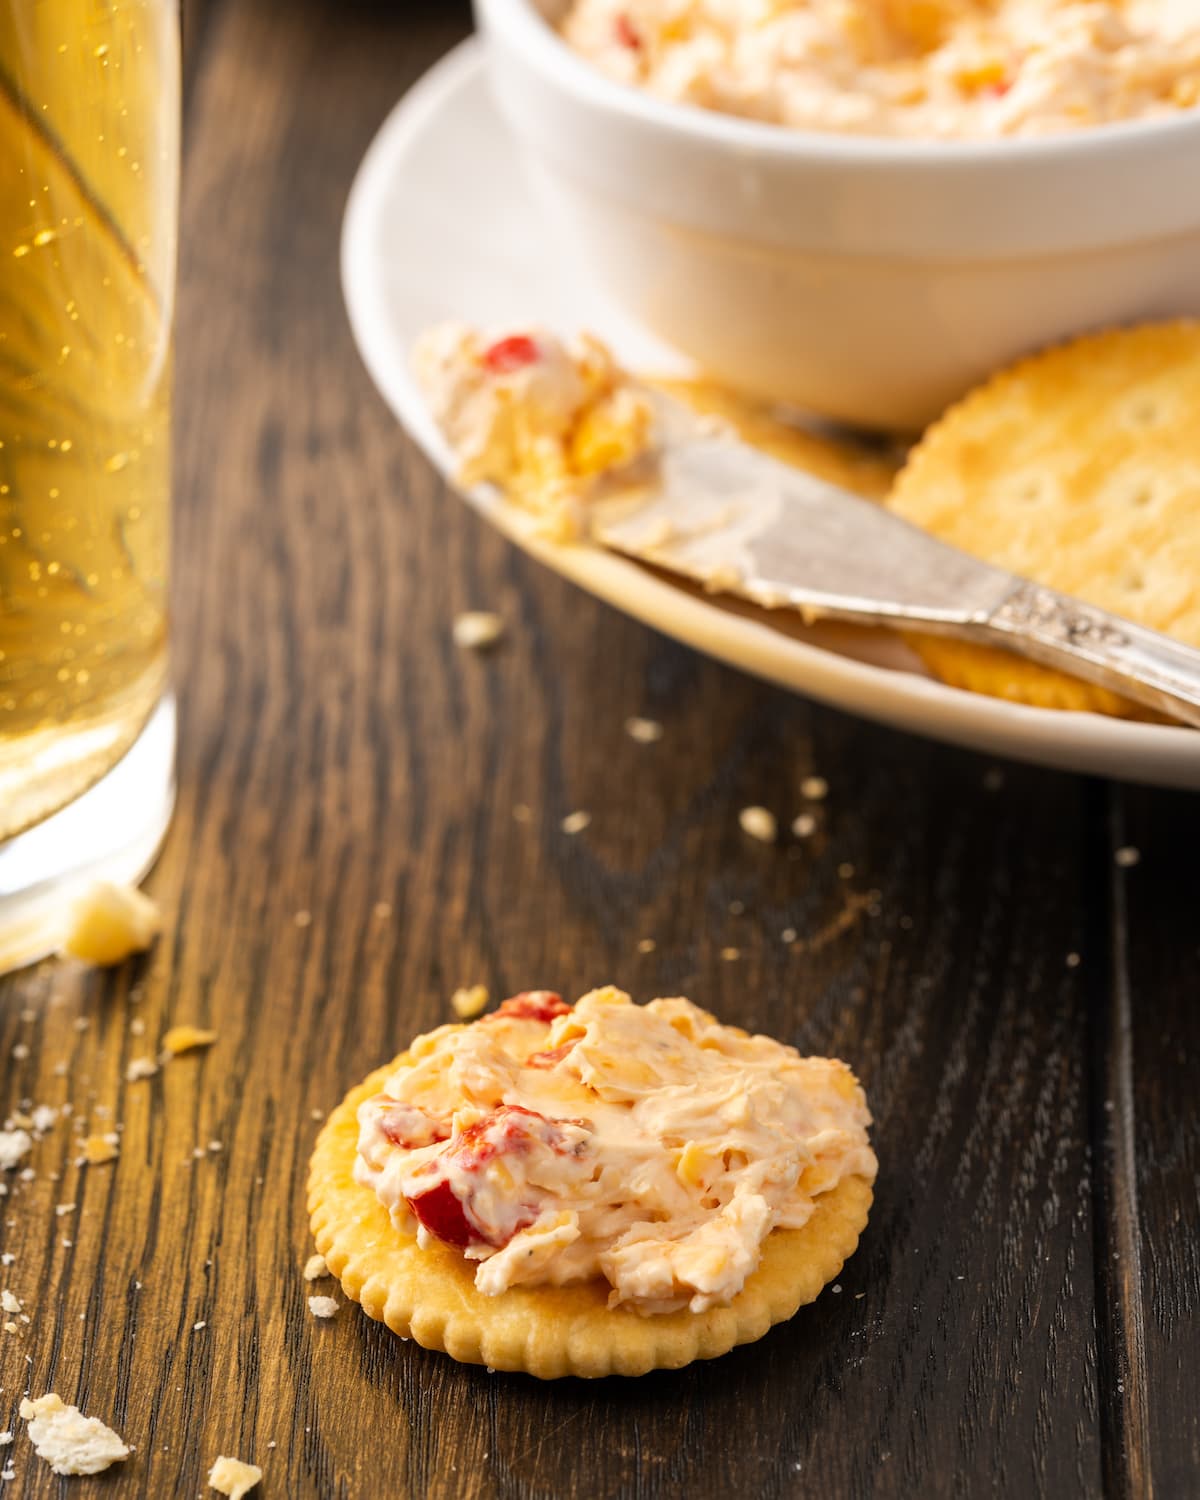 A cracker with pimento cheese on a table with a plate of crackers and pimento cheese in the background.